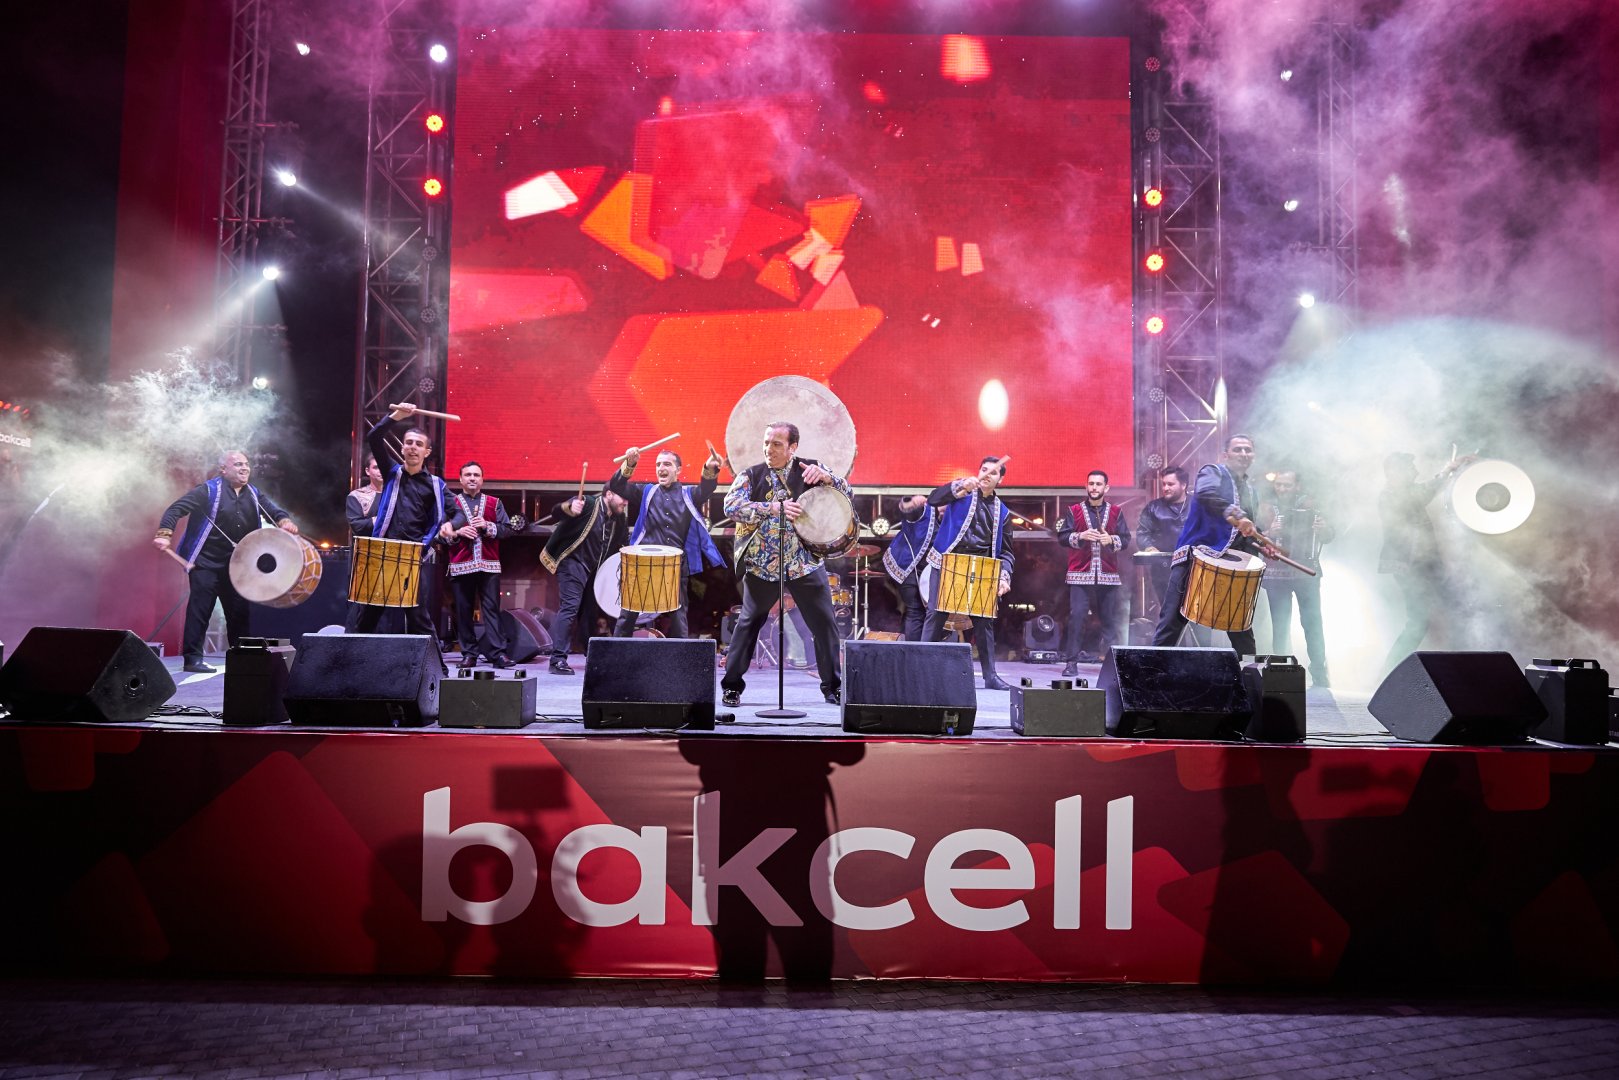 Bakcell event full of innovations took place on the Boulevard (PHOTO)